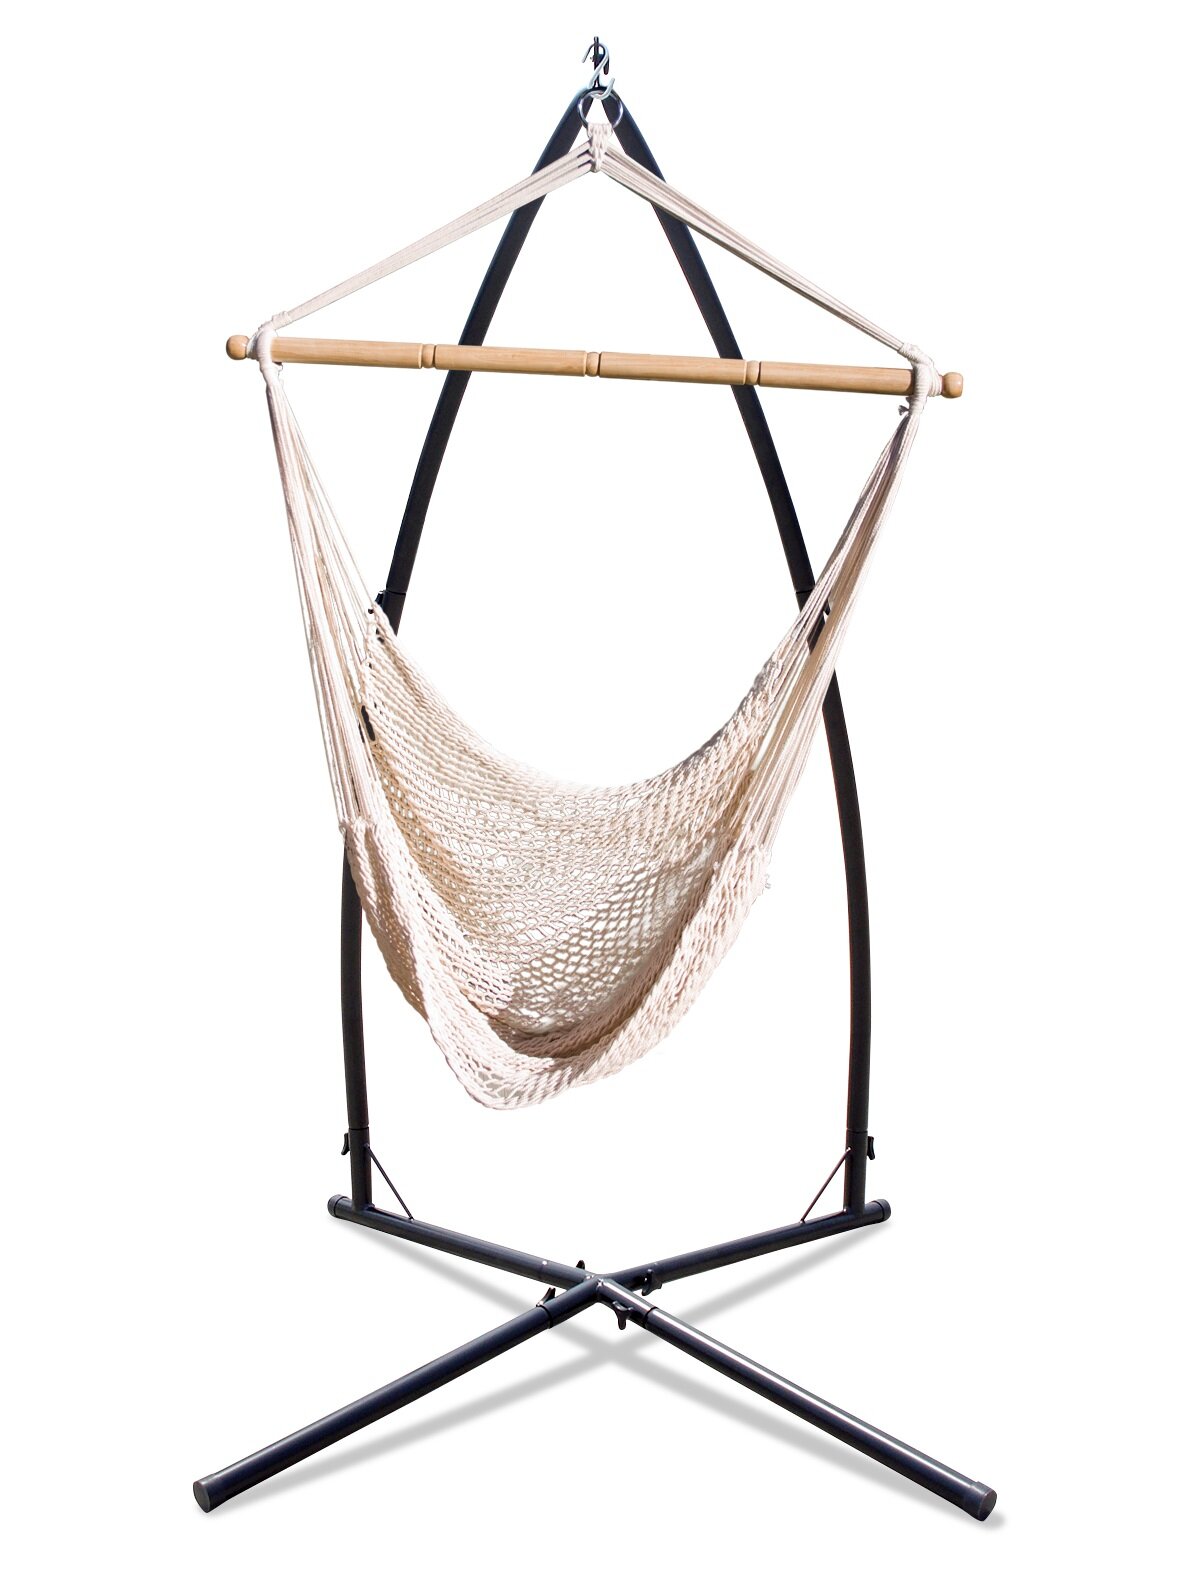 Arlmont & Co. Heidi Chair Hammock with Stand & Reviews